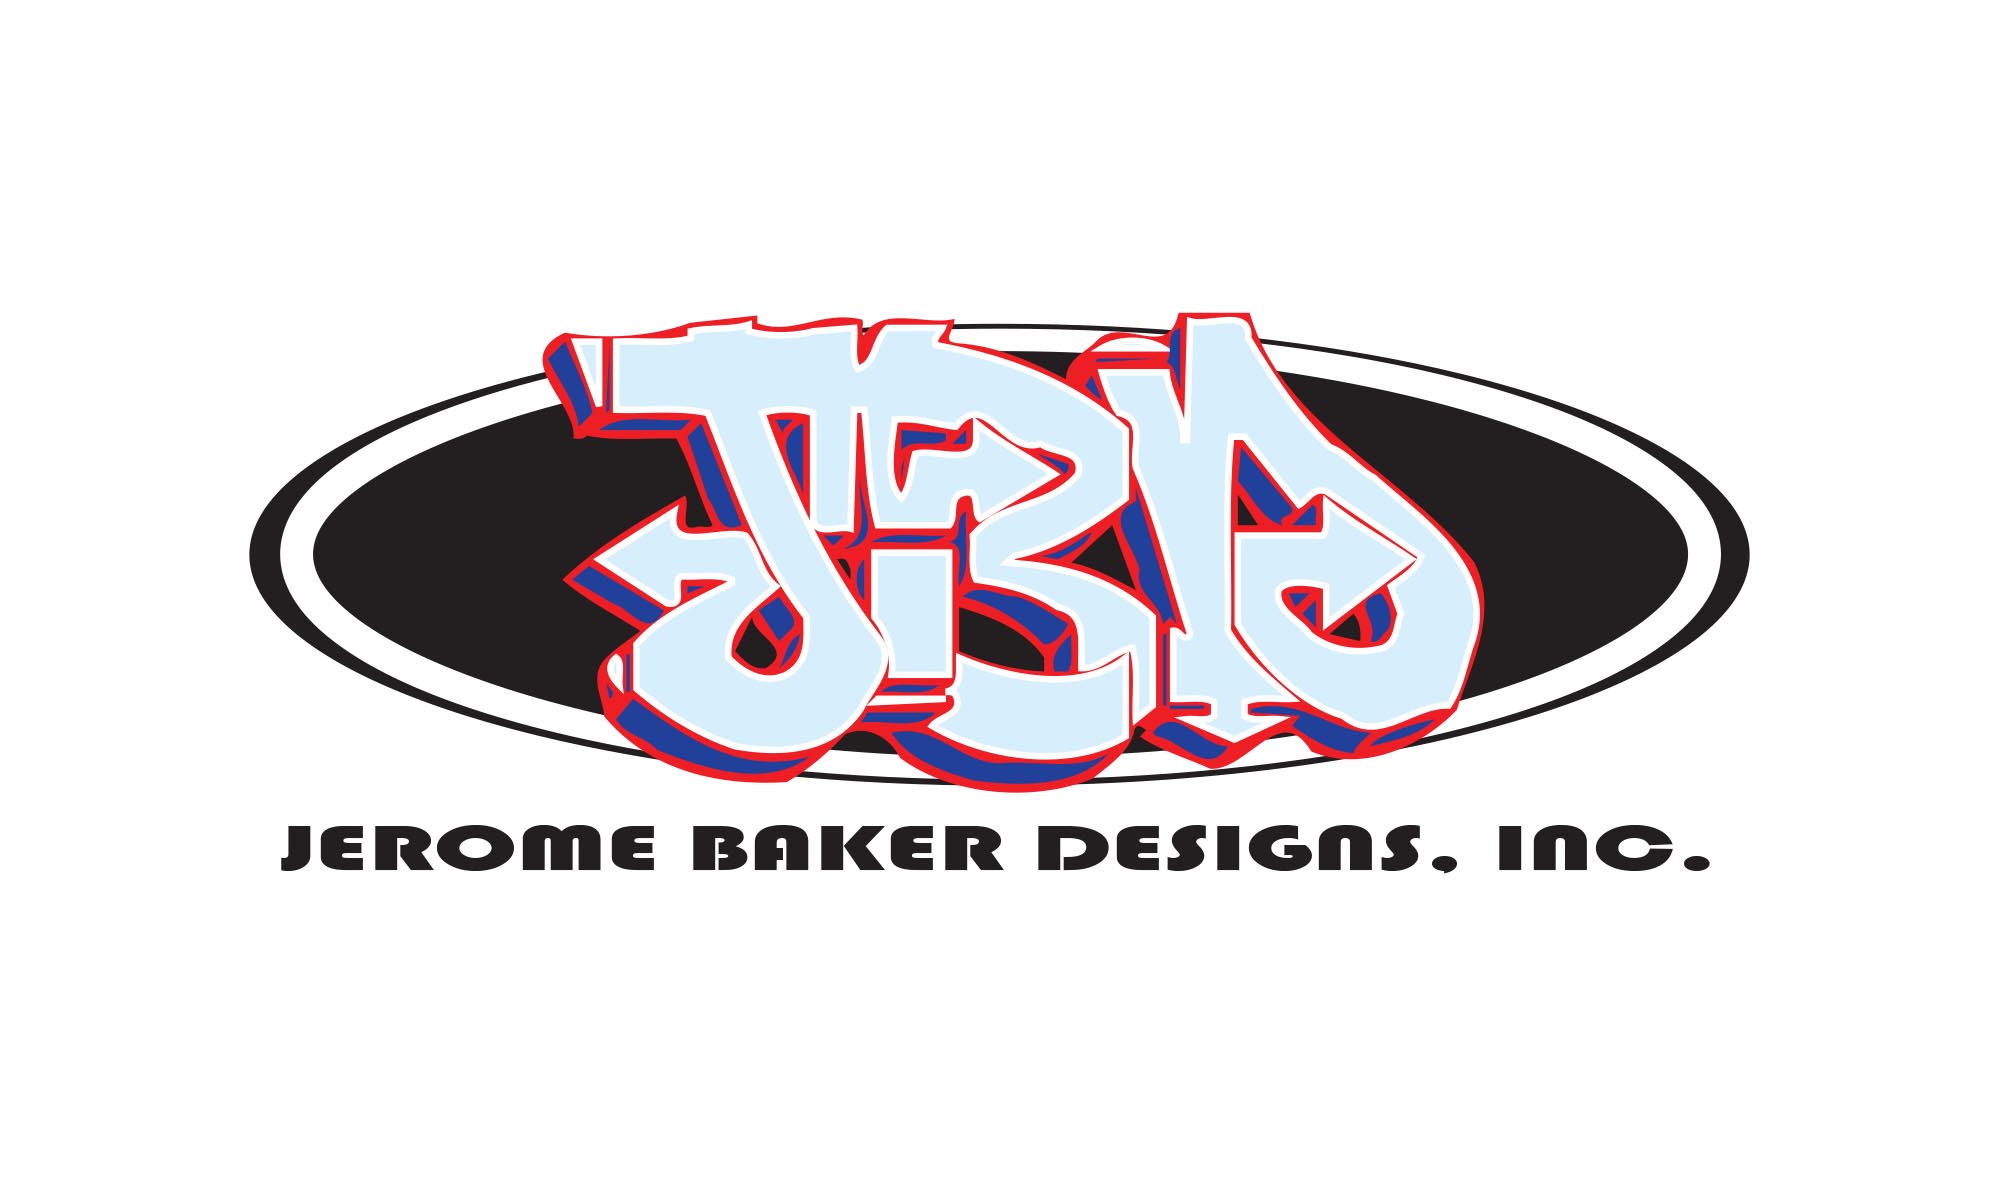 Featured image for “Creating the Jerome Baker logo”